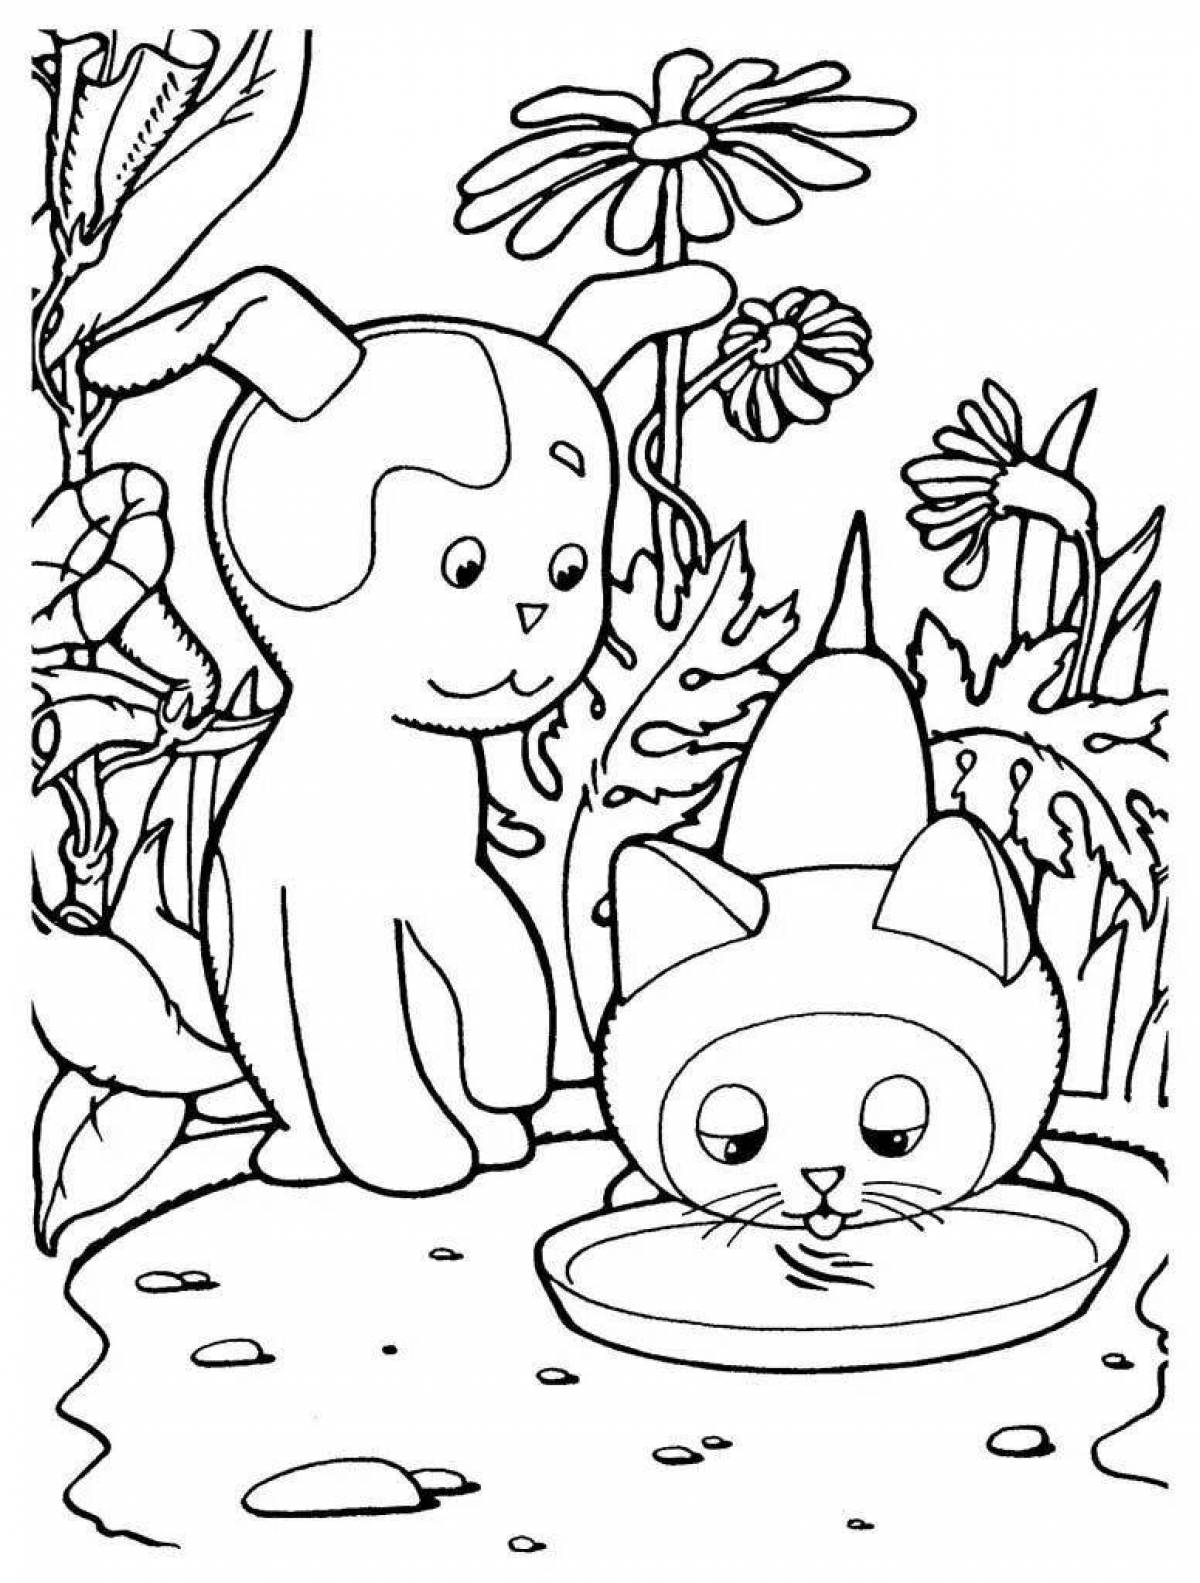 Magic coloring page loading